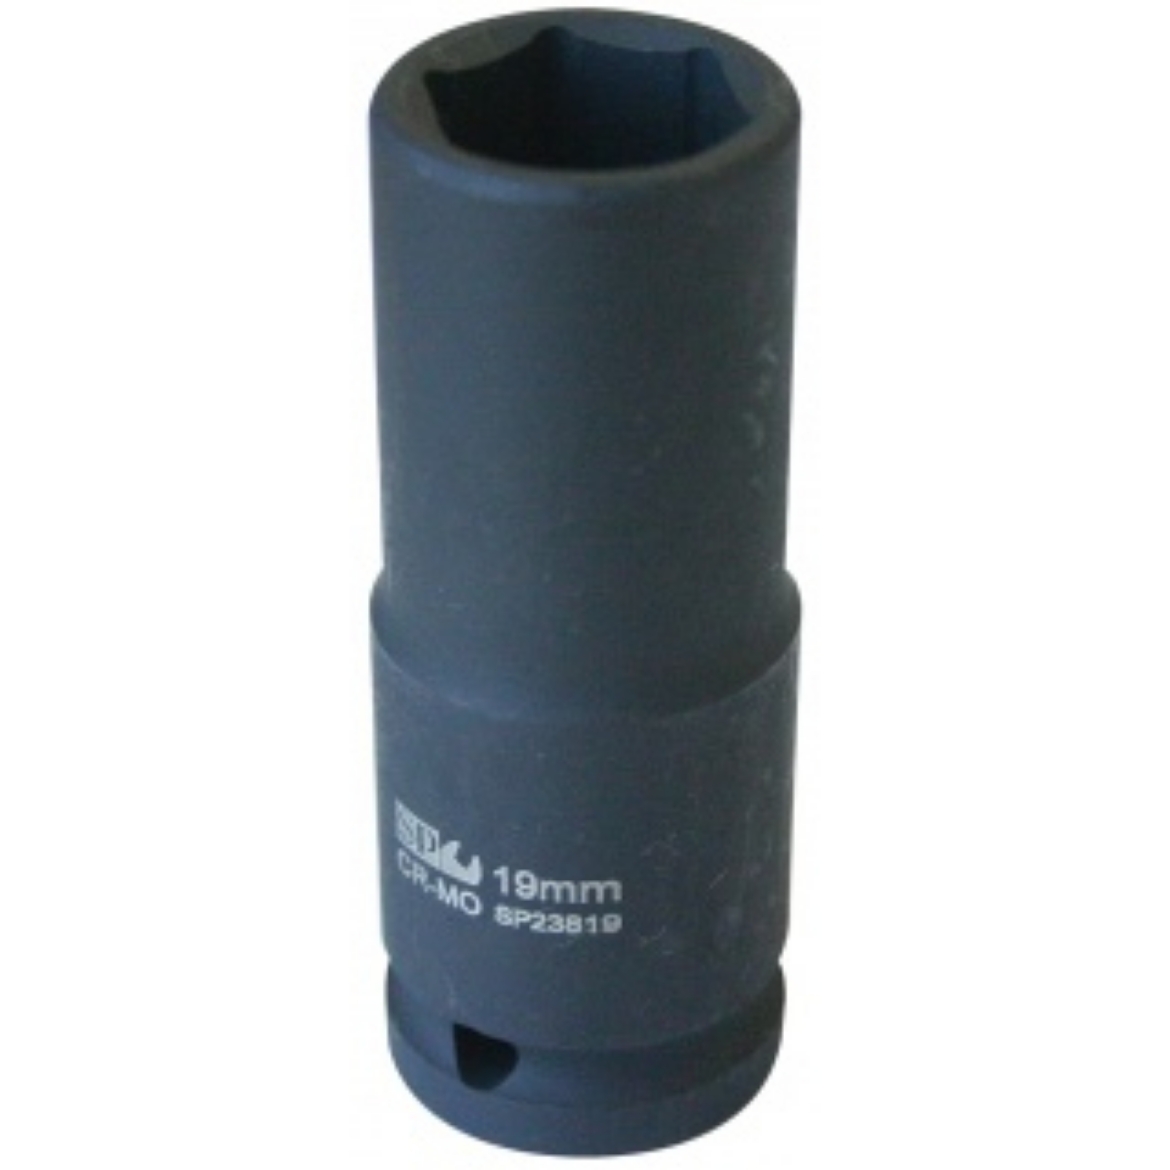 Picture of SOCKET IMPACT 1"DR 6PT DEEP METRIC 55MM SP TOOLS